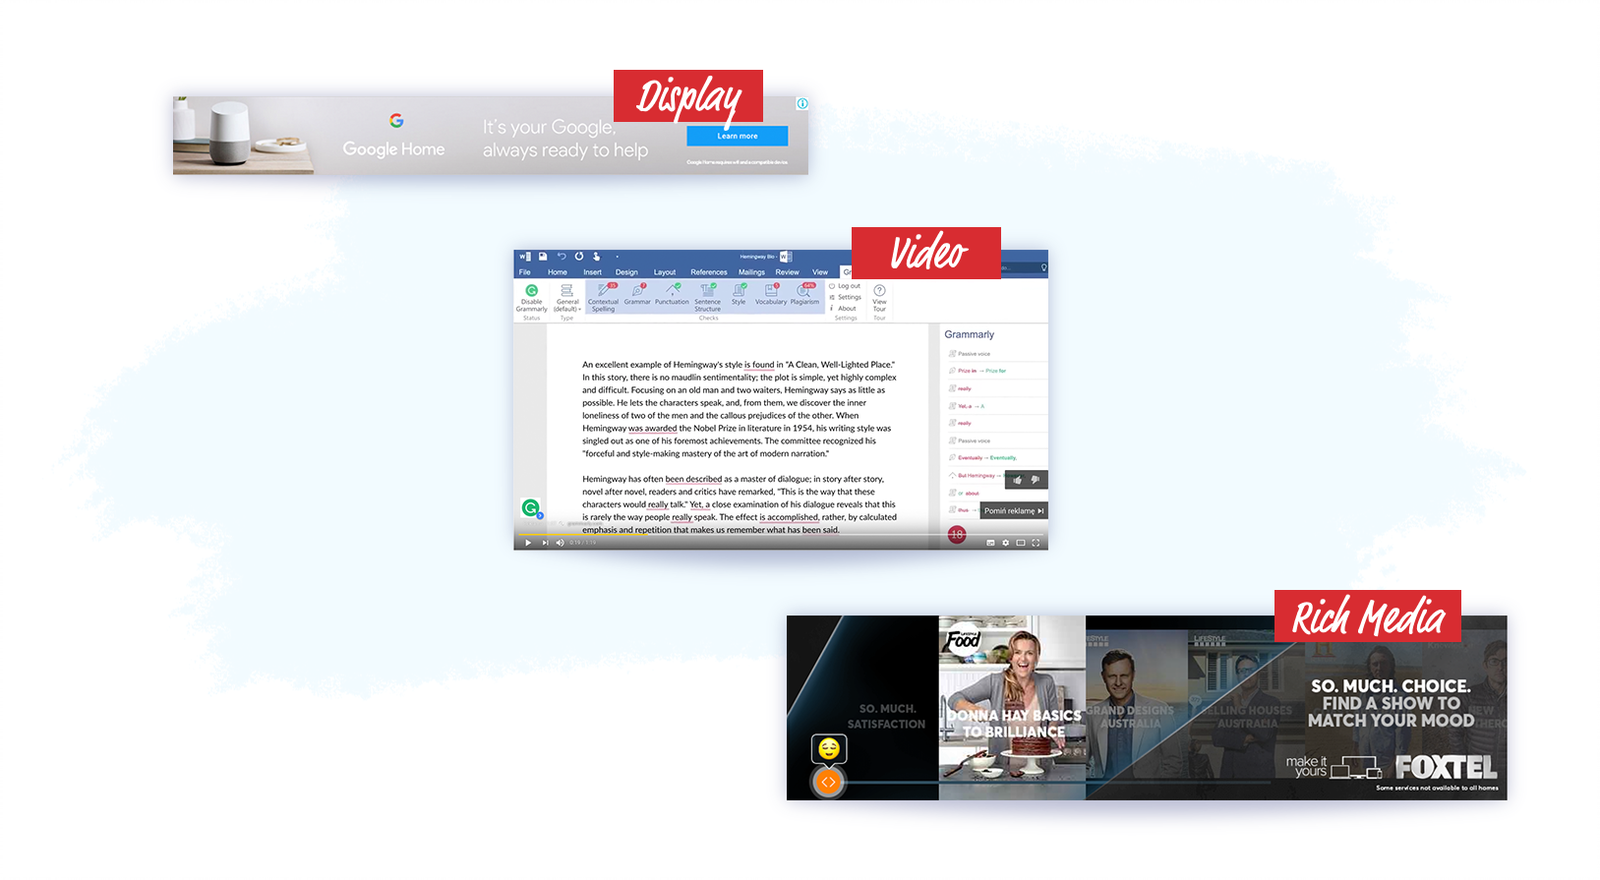 Examples of display, video, and rich media